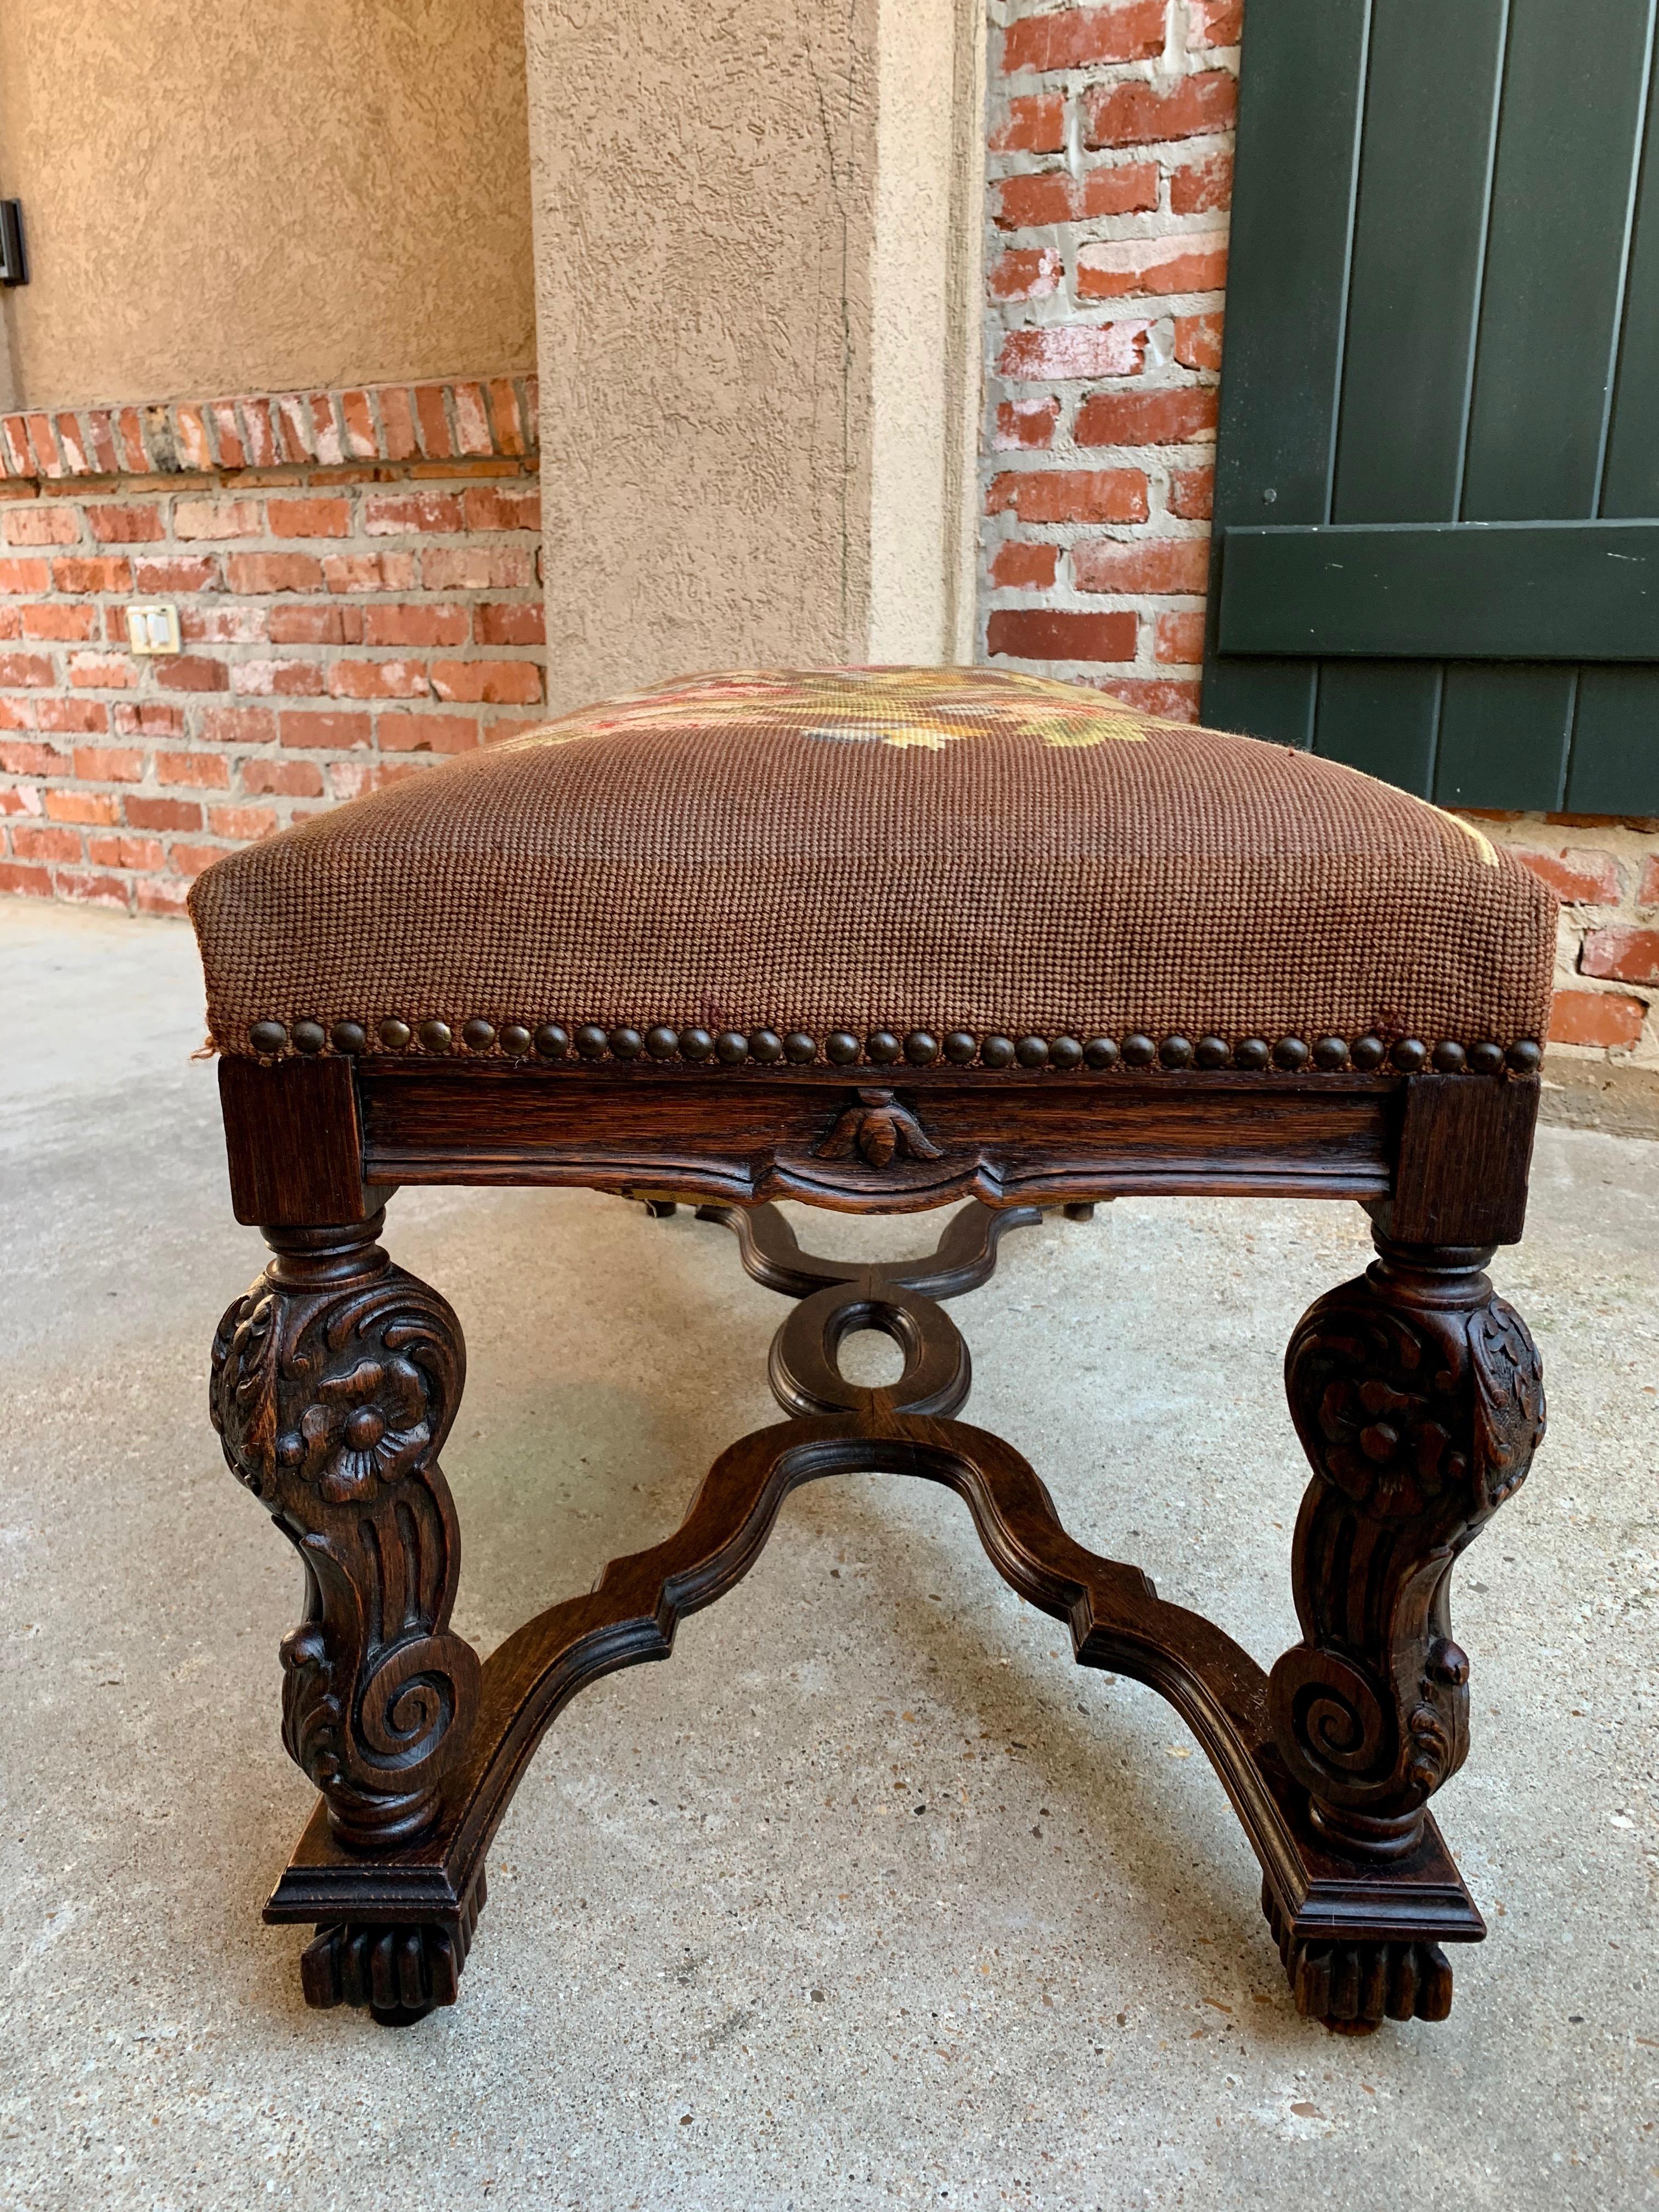 20th Century French Carved Oak Bench Stool Louis XV Style Needlepoint Ottoman 1